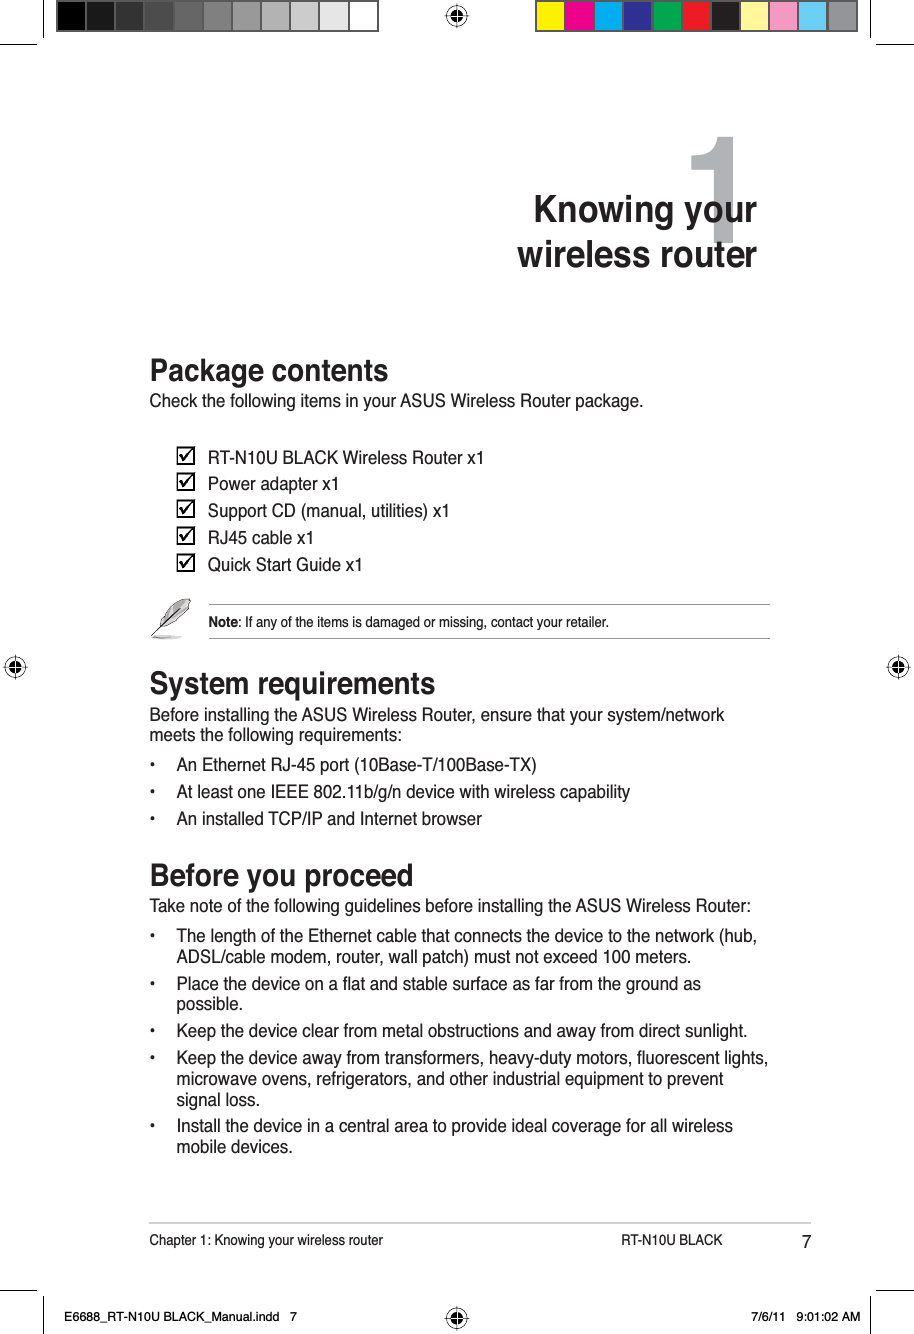 7Chapter 1: Knowing your wireless router         RT-N10U BLACKPackage contentsCheck the following items in your ASUS Wireless Router package. RT-N10U BLACK Wireless Router x1Power adapter x1Support CD (manual, utilities) x1RJ45 cable x1Quick Start Guide x1Note: If any of the items is damaged or missing, contact your retailer.System requirementsBefore installing the ASUS Wireless Router, ensure that your system/network meets the following requirements:• An Ethernet RJ-45 port (10Base-T/100Base-TX)• At least one IEEE 802.11b/g/n device with wireless capability• An installed TCP/IP and Internet browserBefore you proceedTake note of the following guidelines before installing the ASUS Wireless Router:• The length of the Ethernet cable that connects the device to the network (hub, ADSL/cable modem, router, wall patch) must not exceed 100 meters. 3ODFHWKHGHYLFHRQDÁDWDQGVWDEOHVXUIDFHDVIDUIURPWKHJURXQGDVpossible.• Keep the device clear from metal obstructions and away from direct sunlight. .HHSWKHGHYLFHDZD\IURPWUDQVIRUPHUVKHDY\GXW\PRWRUVÁXRUHVFHQWOLJKWVmicrowave ovens, refrigerators, and other industrial equipment to prevent signal loss.• Install the device in a central area to provide ideal coverage for all wireless mobile devices.1Knowing your wireless routerE6688_RT-N10U BLACK_Manual.indd   7 7/6/11   9:01:02 AM